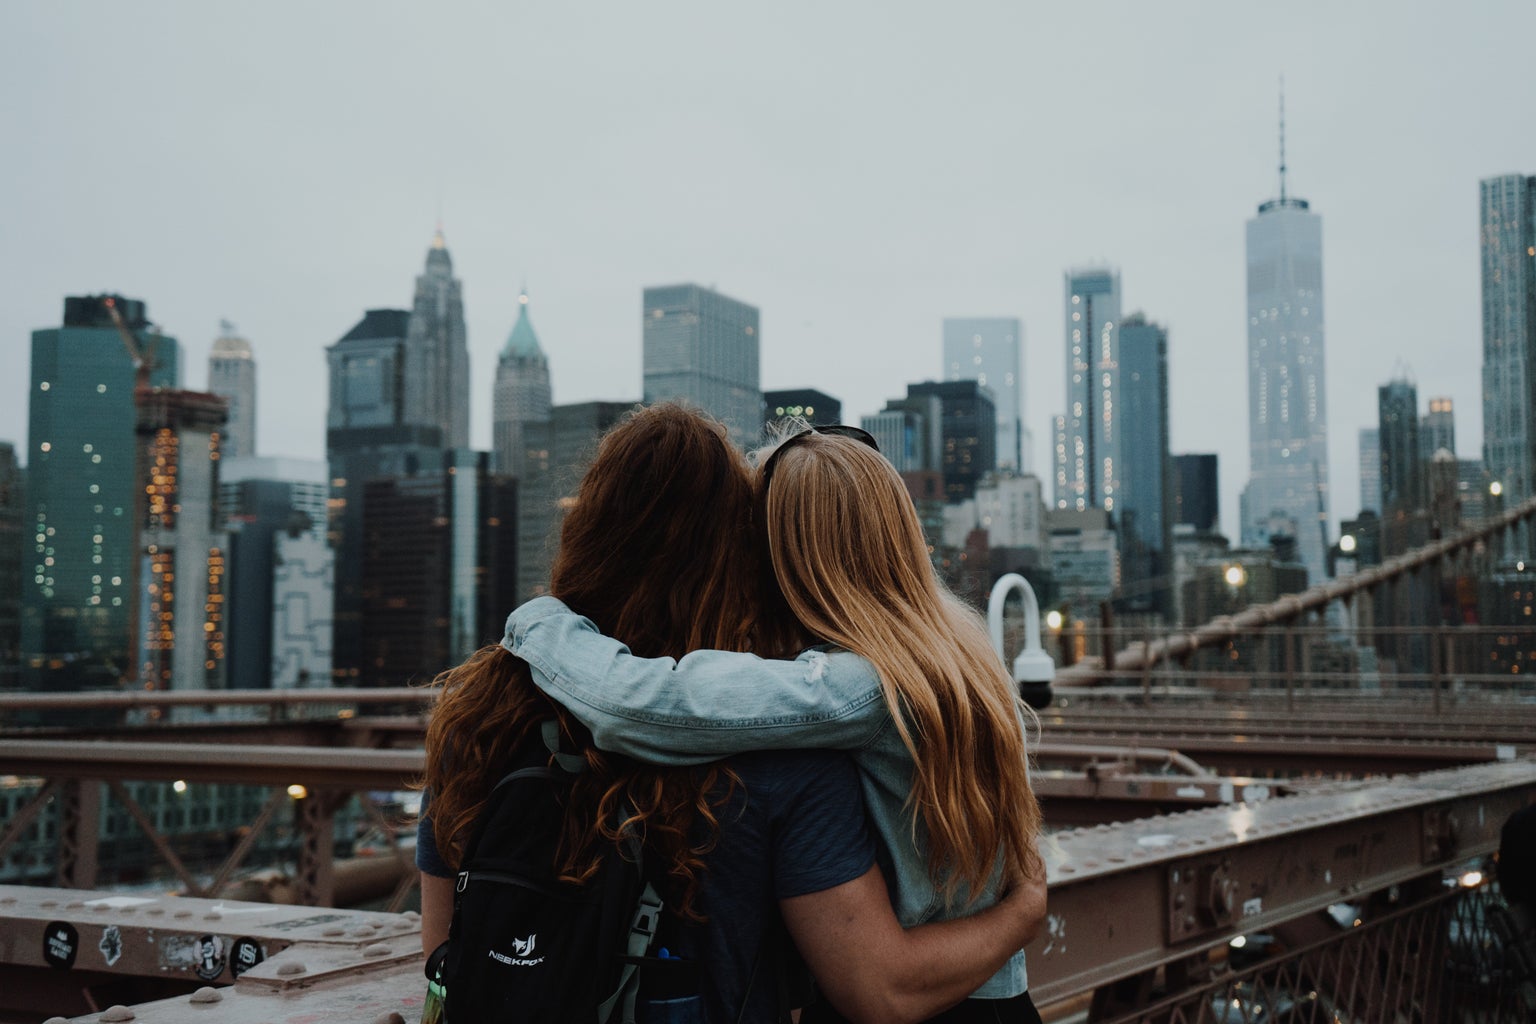 Two girls embracing from behind